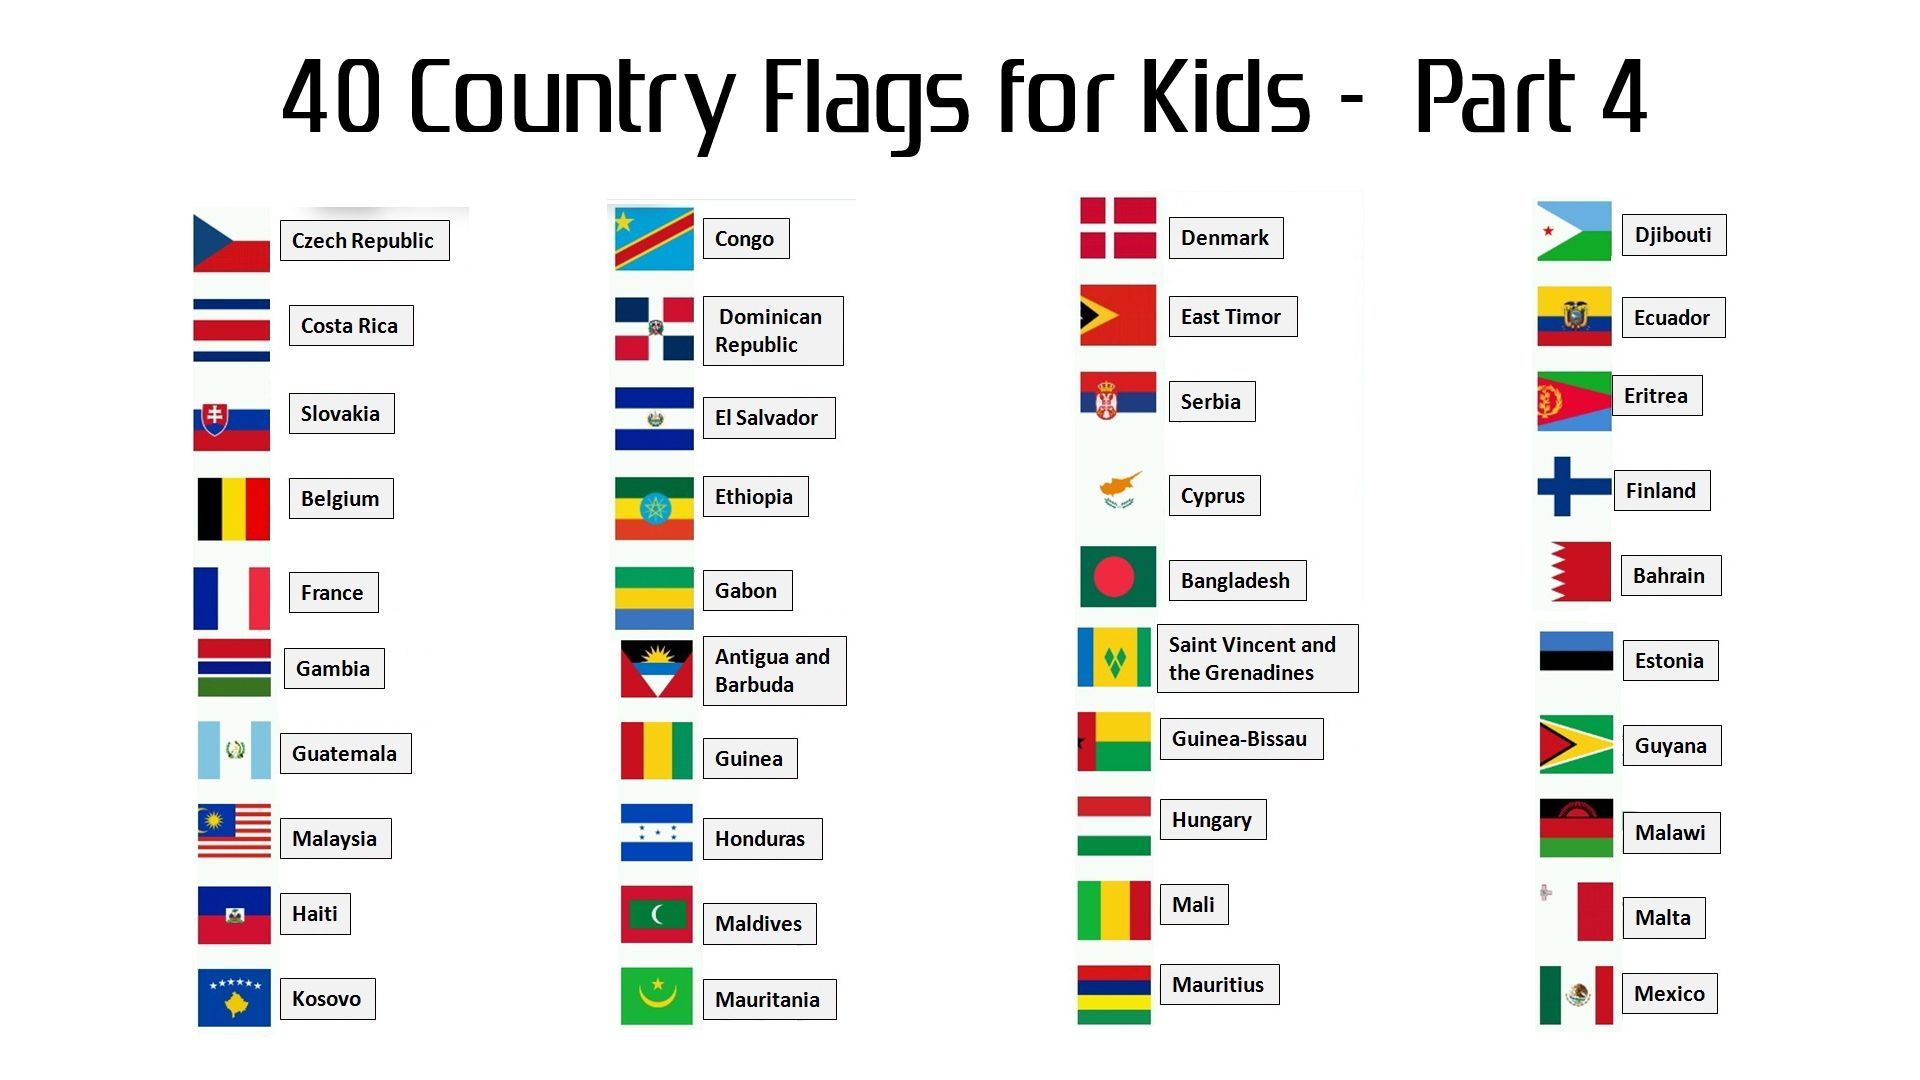 Country Flags with Names for Kids 4 Wallpaper. Wallpaper Download. High Resolution Wallpaper. Flags with names, World flags with names, Country flags